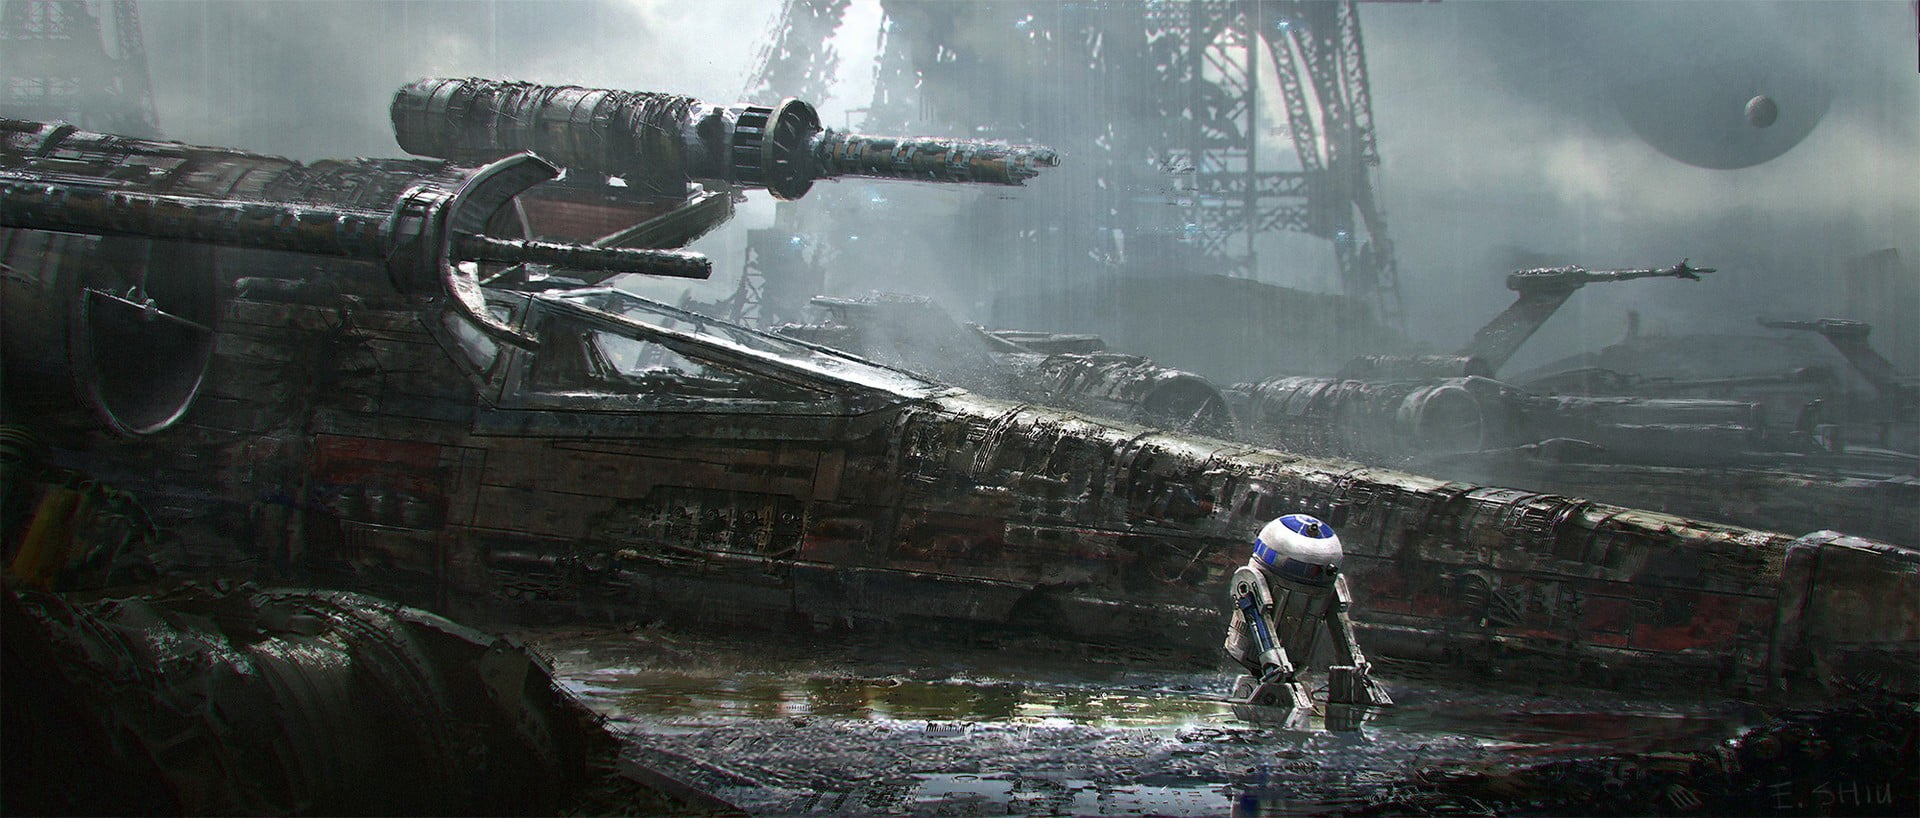 rusted black war ship, Star Wars, R2-D2, X-wing, water, industry